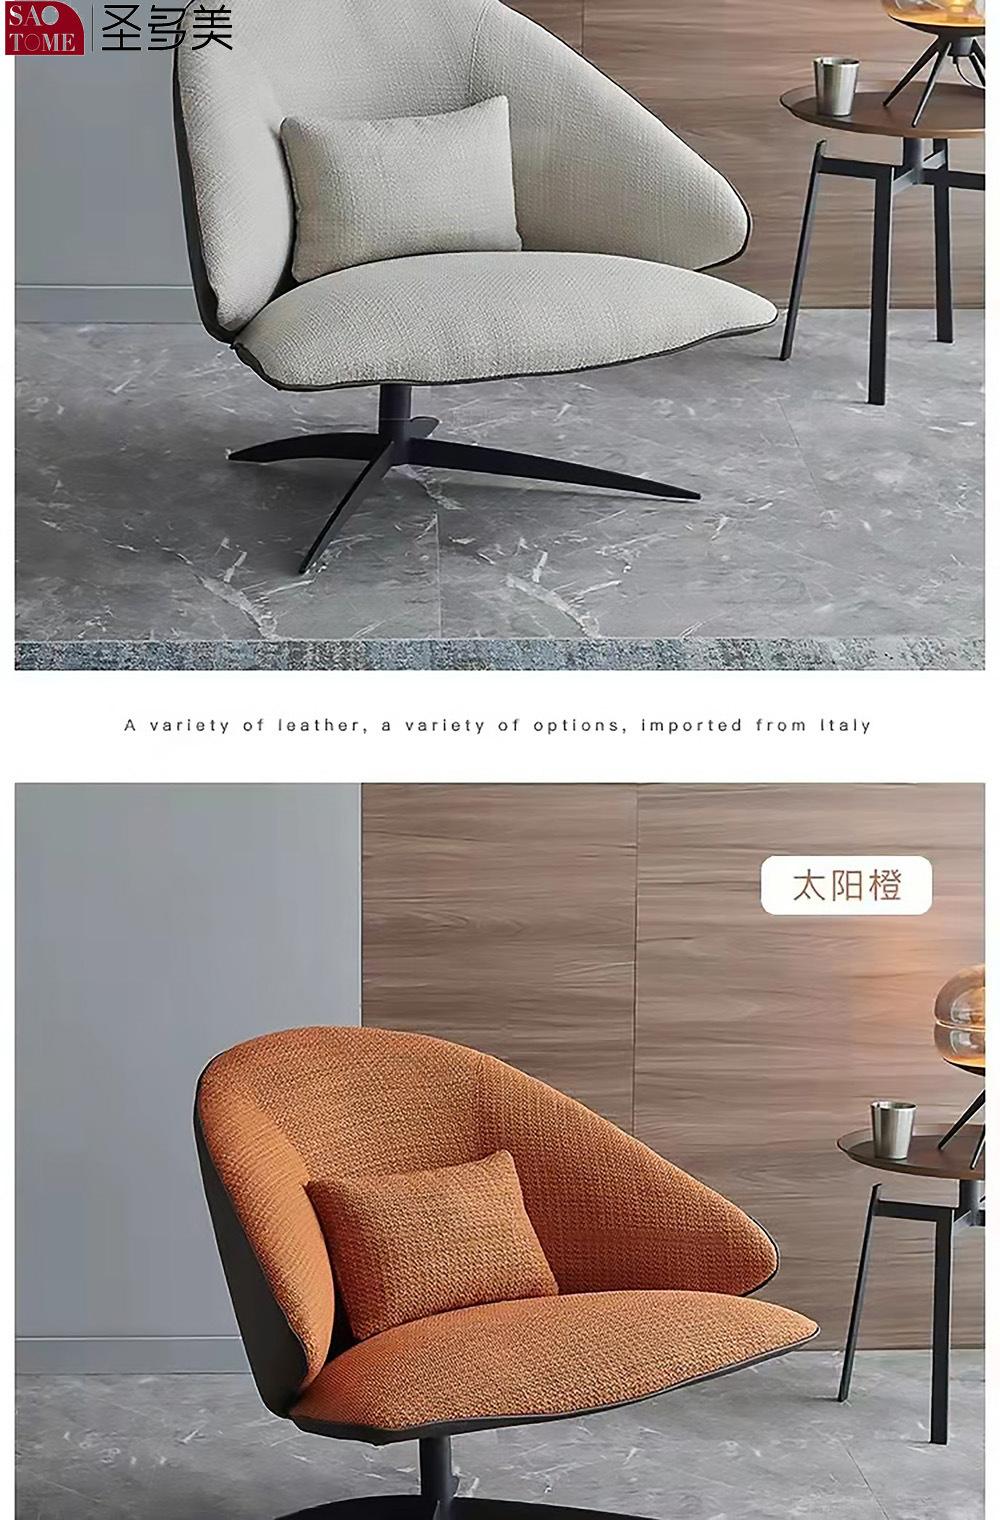 Modern Design Living Room Furniture Leather Lounge Chair for Home